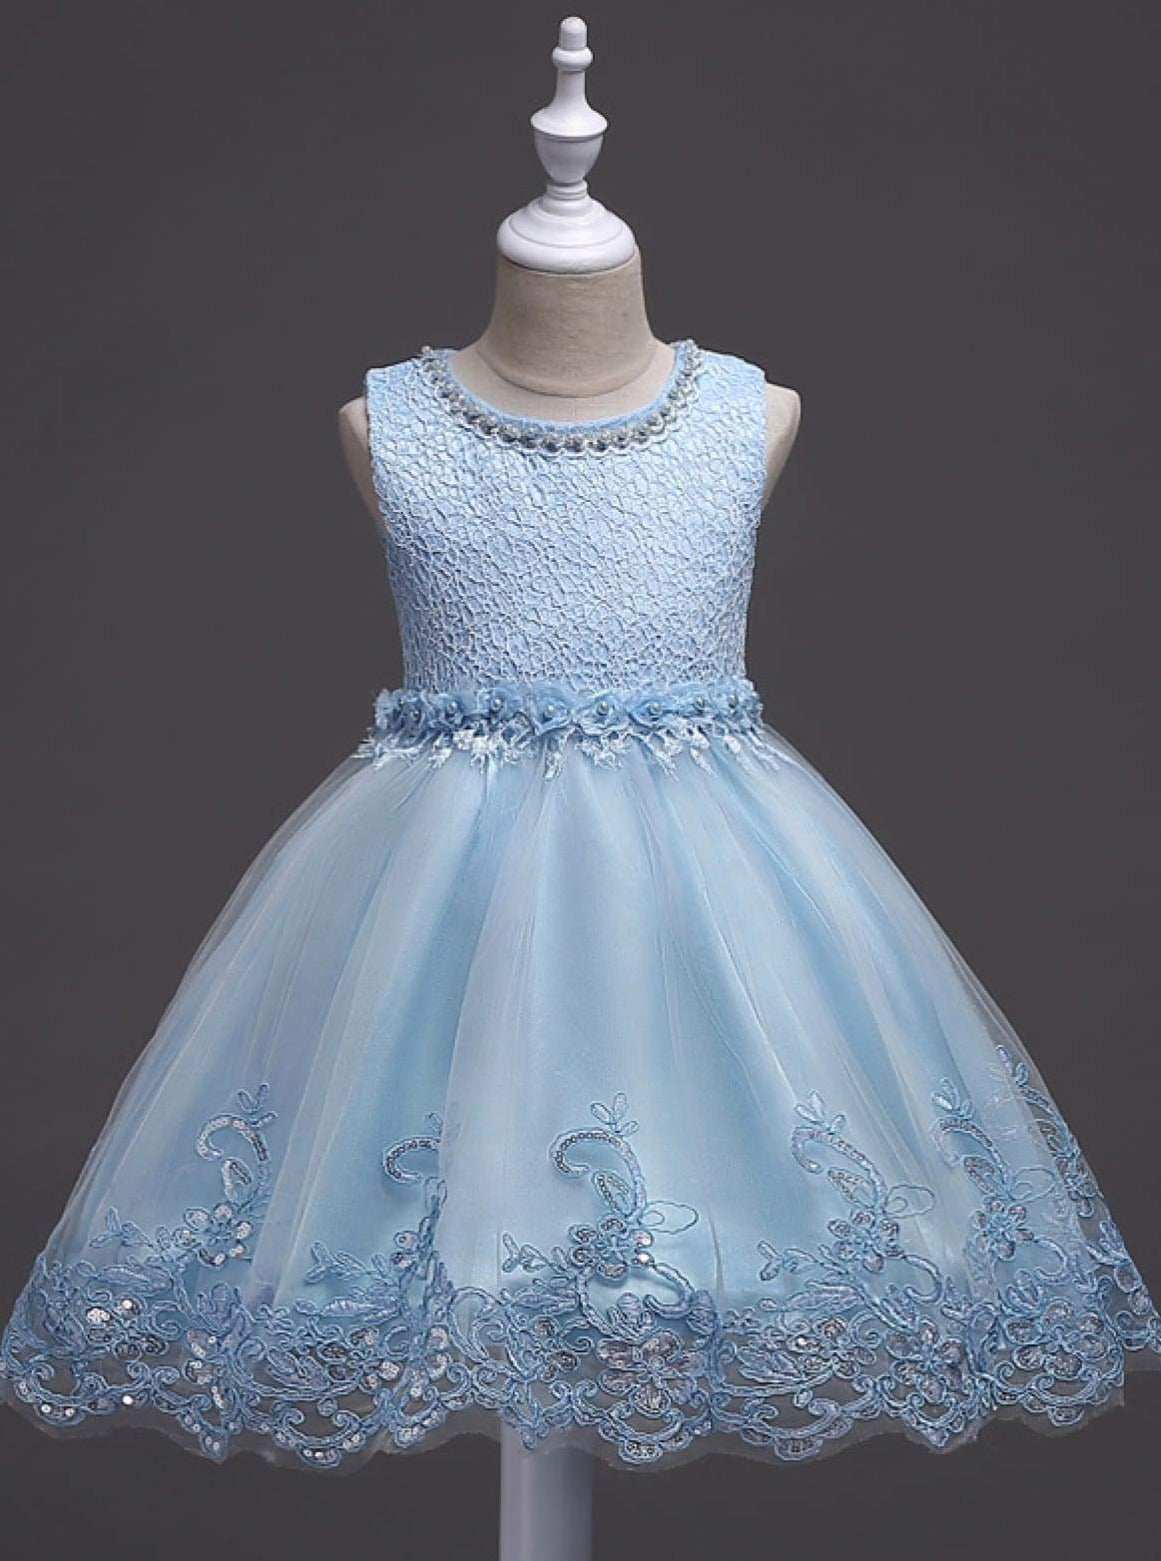 Girls sleeveless Embroidered Rose Pearl Flower Girl & Special Occasion Party Dress - Blue / 3T - Girls Spring Dressy Dress